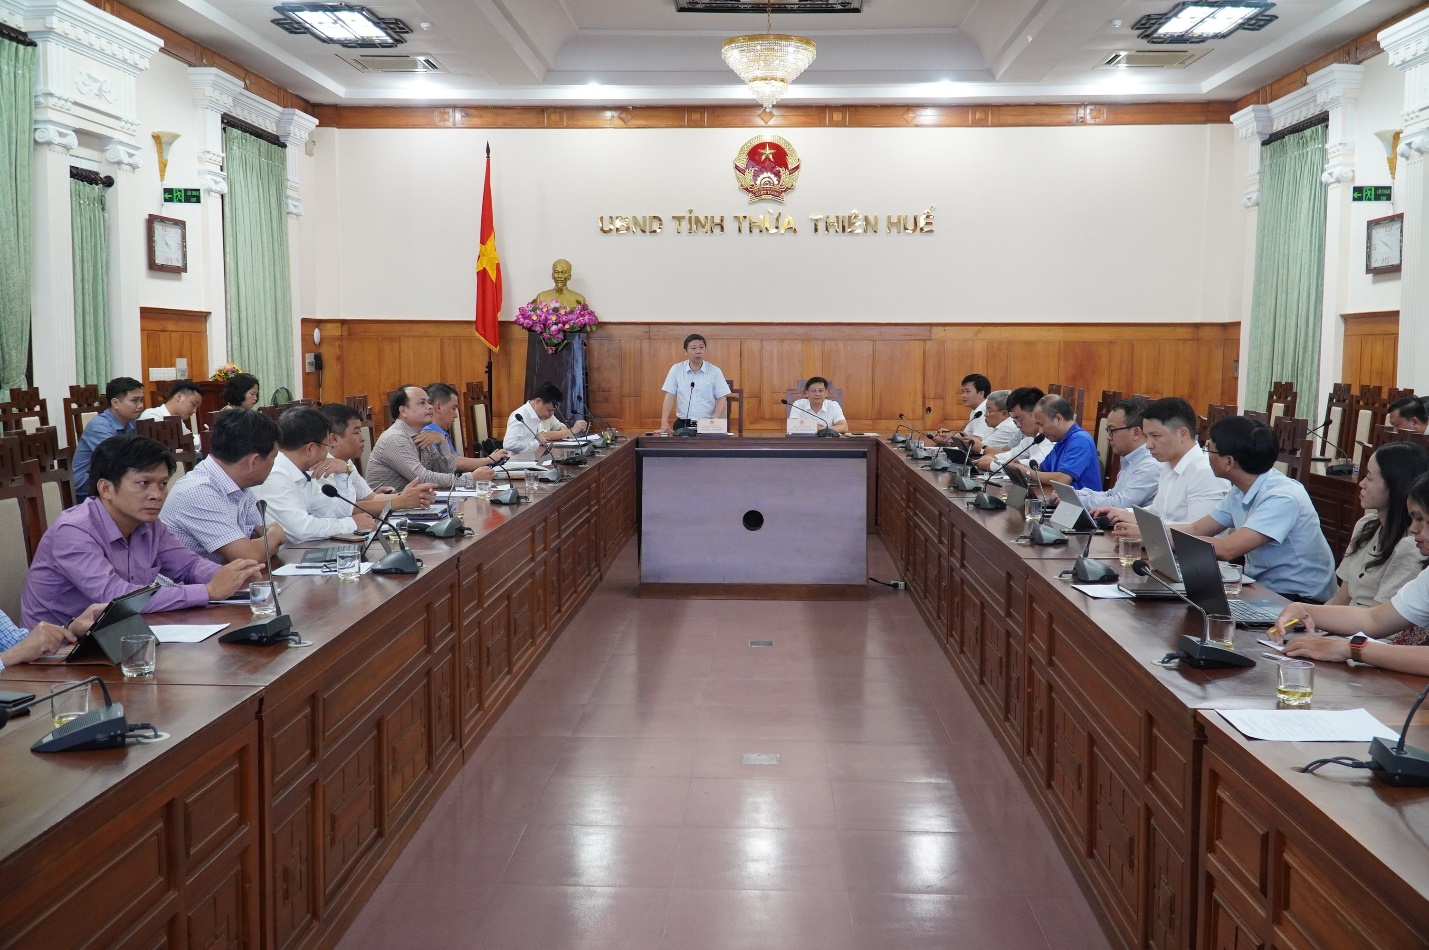 Image 2: Mr. Duong Anh Duc – Vice Chairman of Ho Chi Minh City People's Committee, spoke and gave guidance at the meeting.